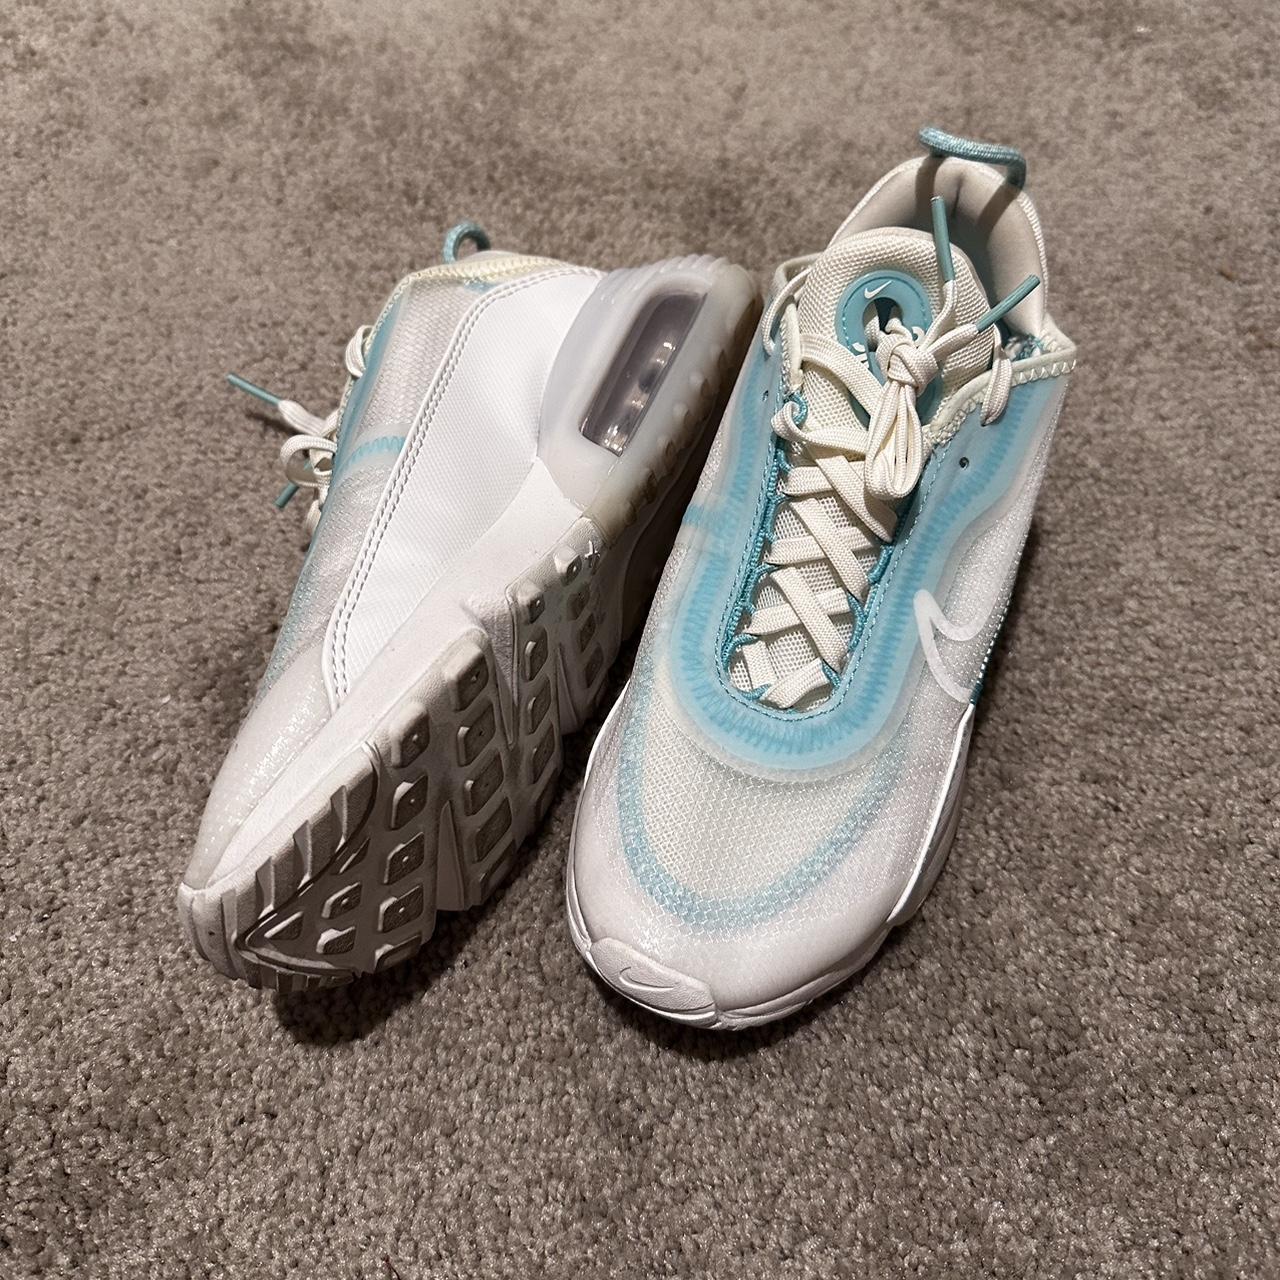 Nike Air Max 2070s Used about 2-3 times. Don’t... - Depop